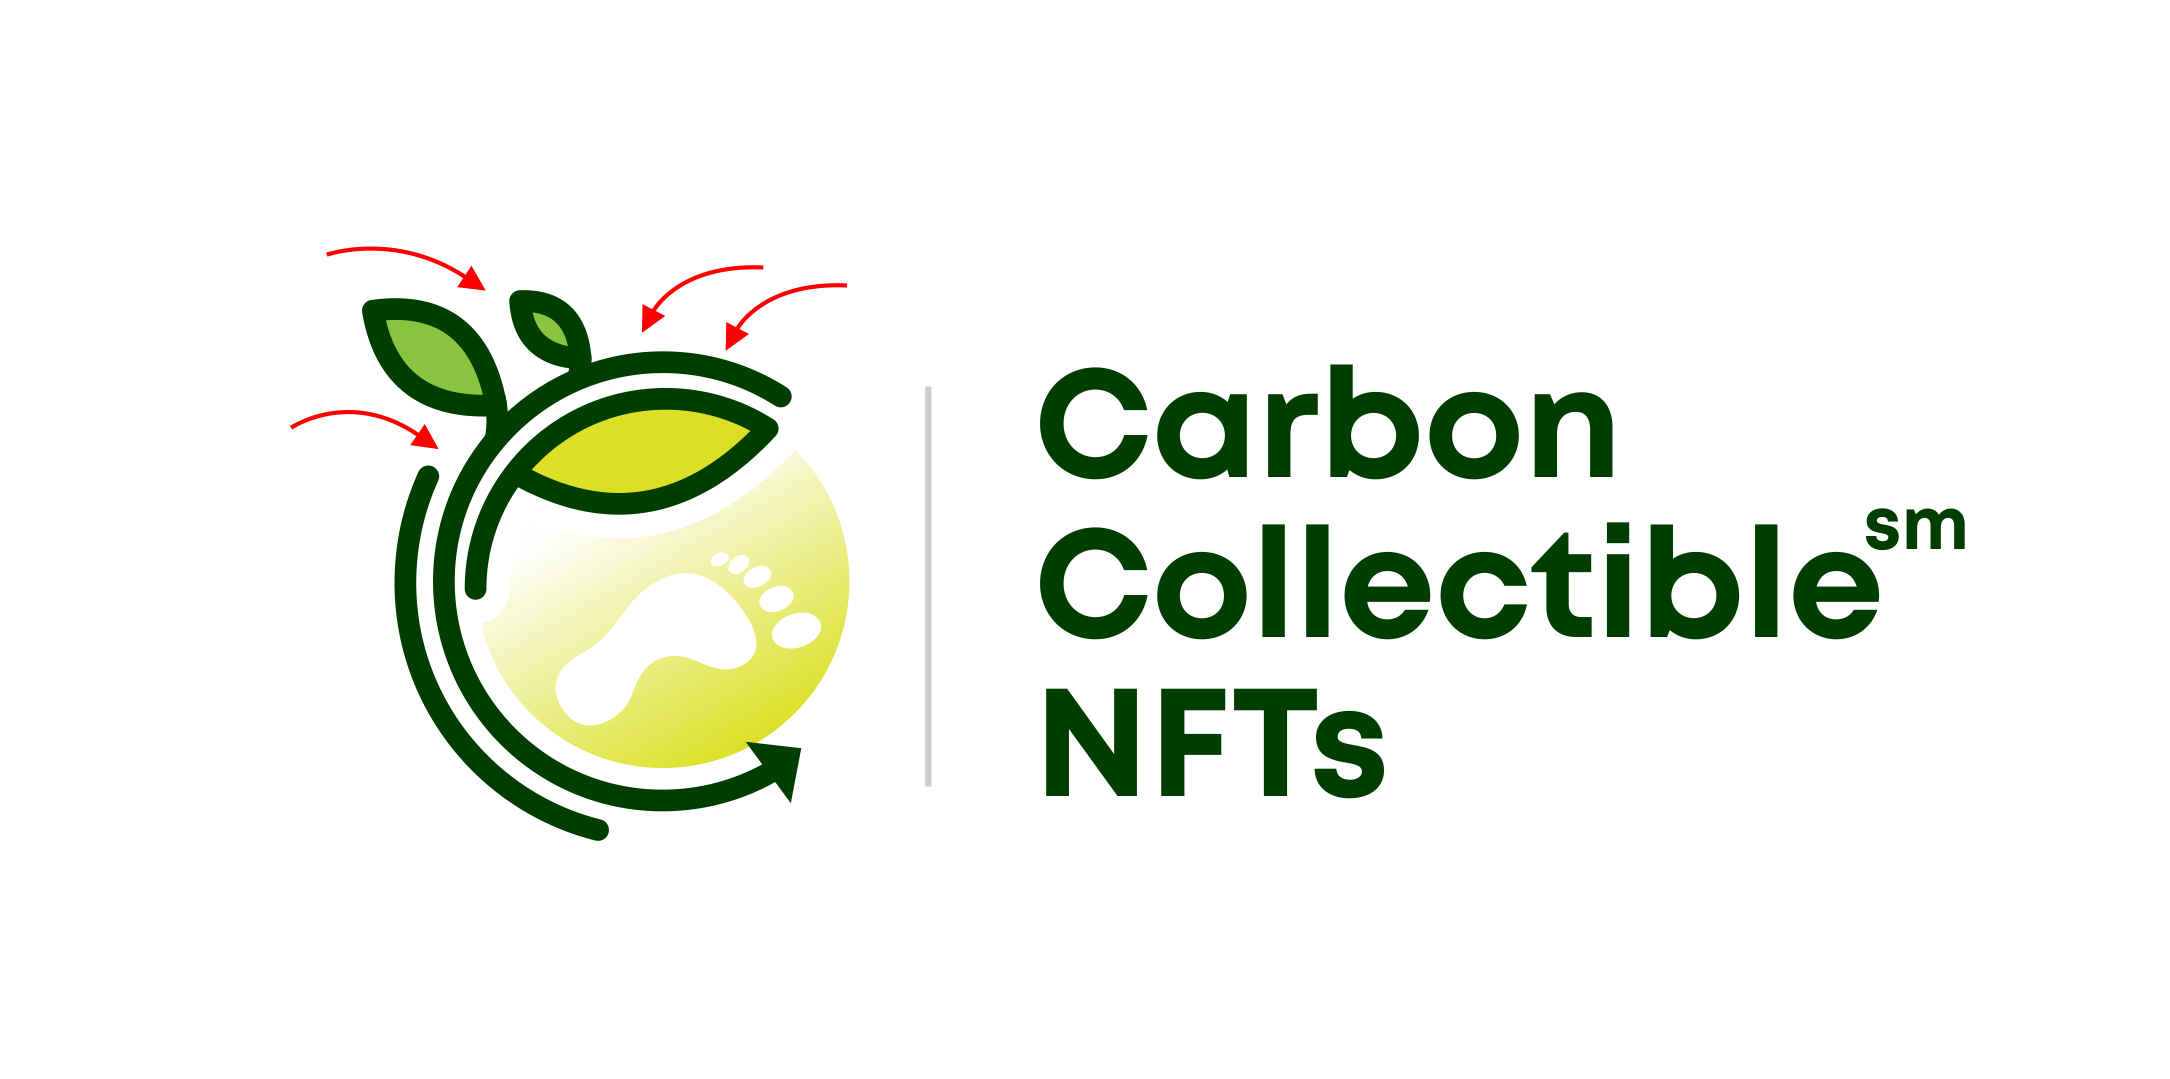 Carbon Collectable NFTs open a waiting list with the goal of bringing equity and inclusiveness to climate finance 